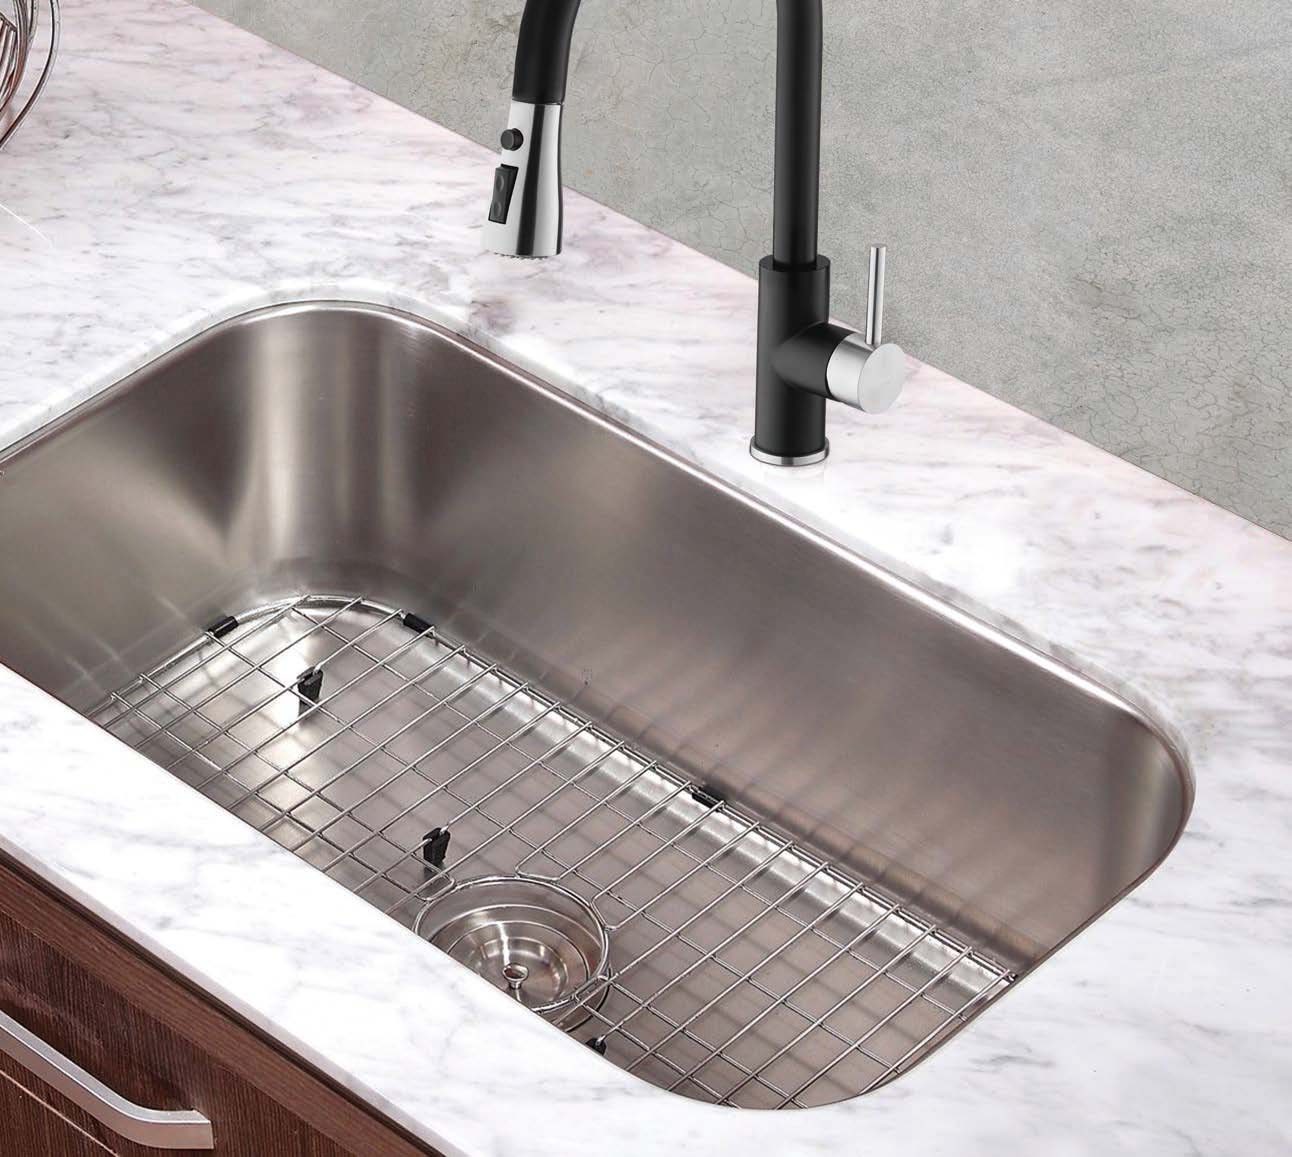 Choosing the Right Style sink for Your Kitchen or Bathroom